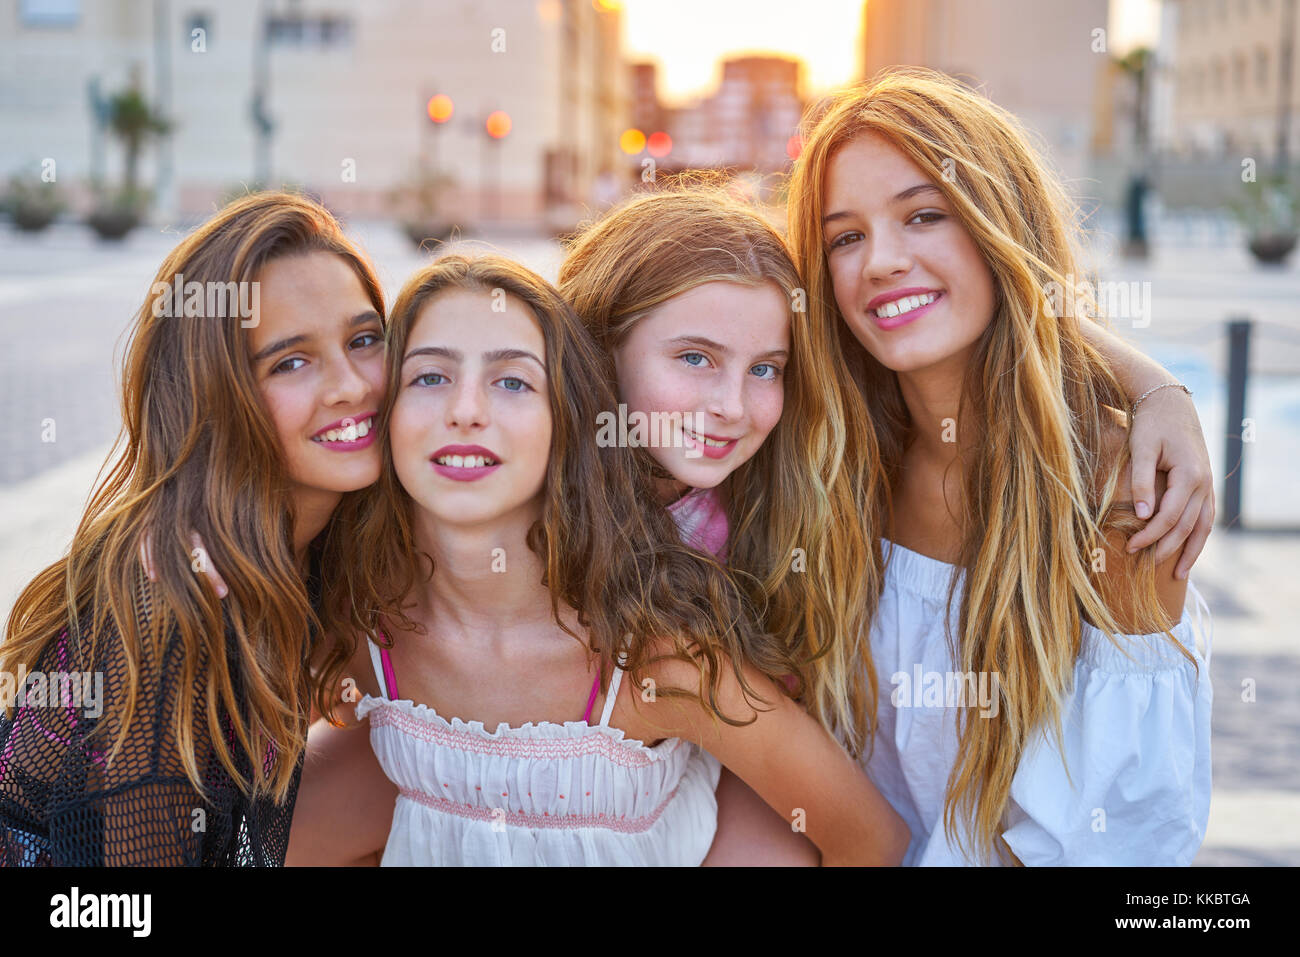 Best friends teen girls at sunset in the city group Stock Photo